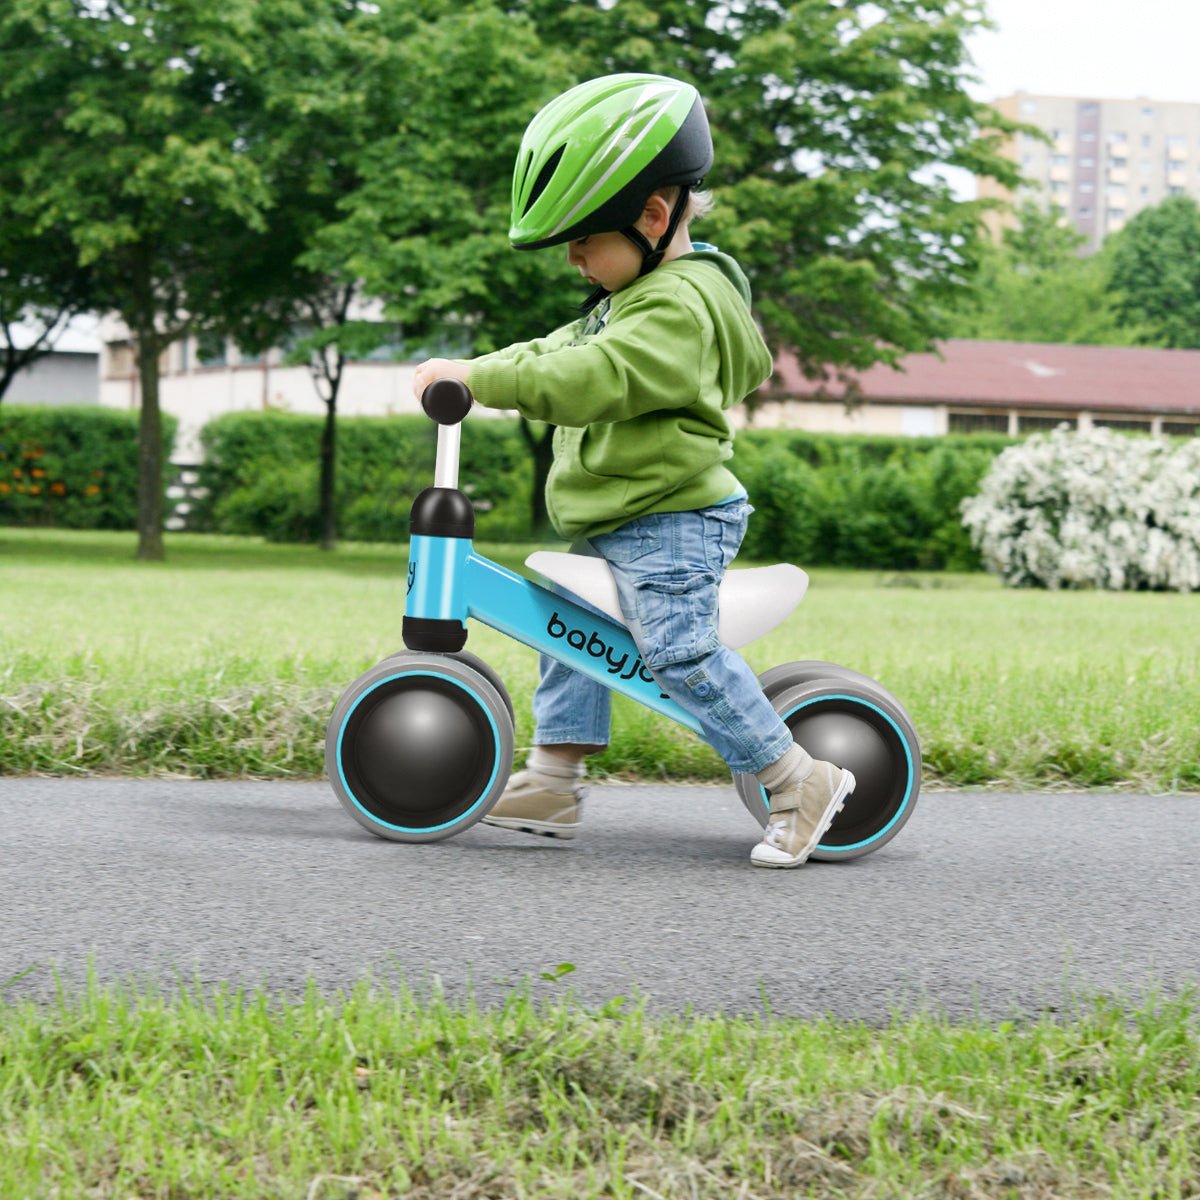 Confidence Unleashed: 4-Wheel Blue Balance Training Bike for Young Riders